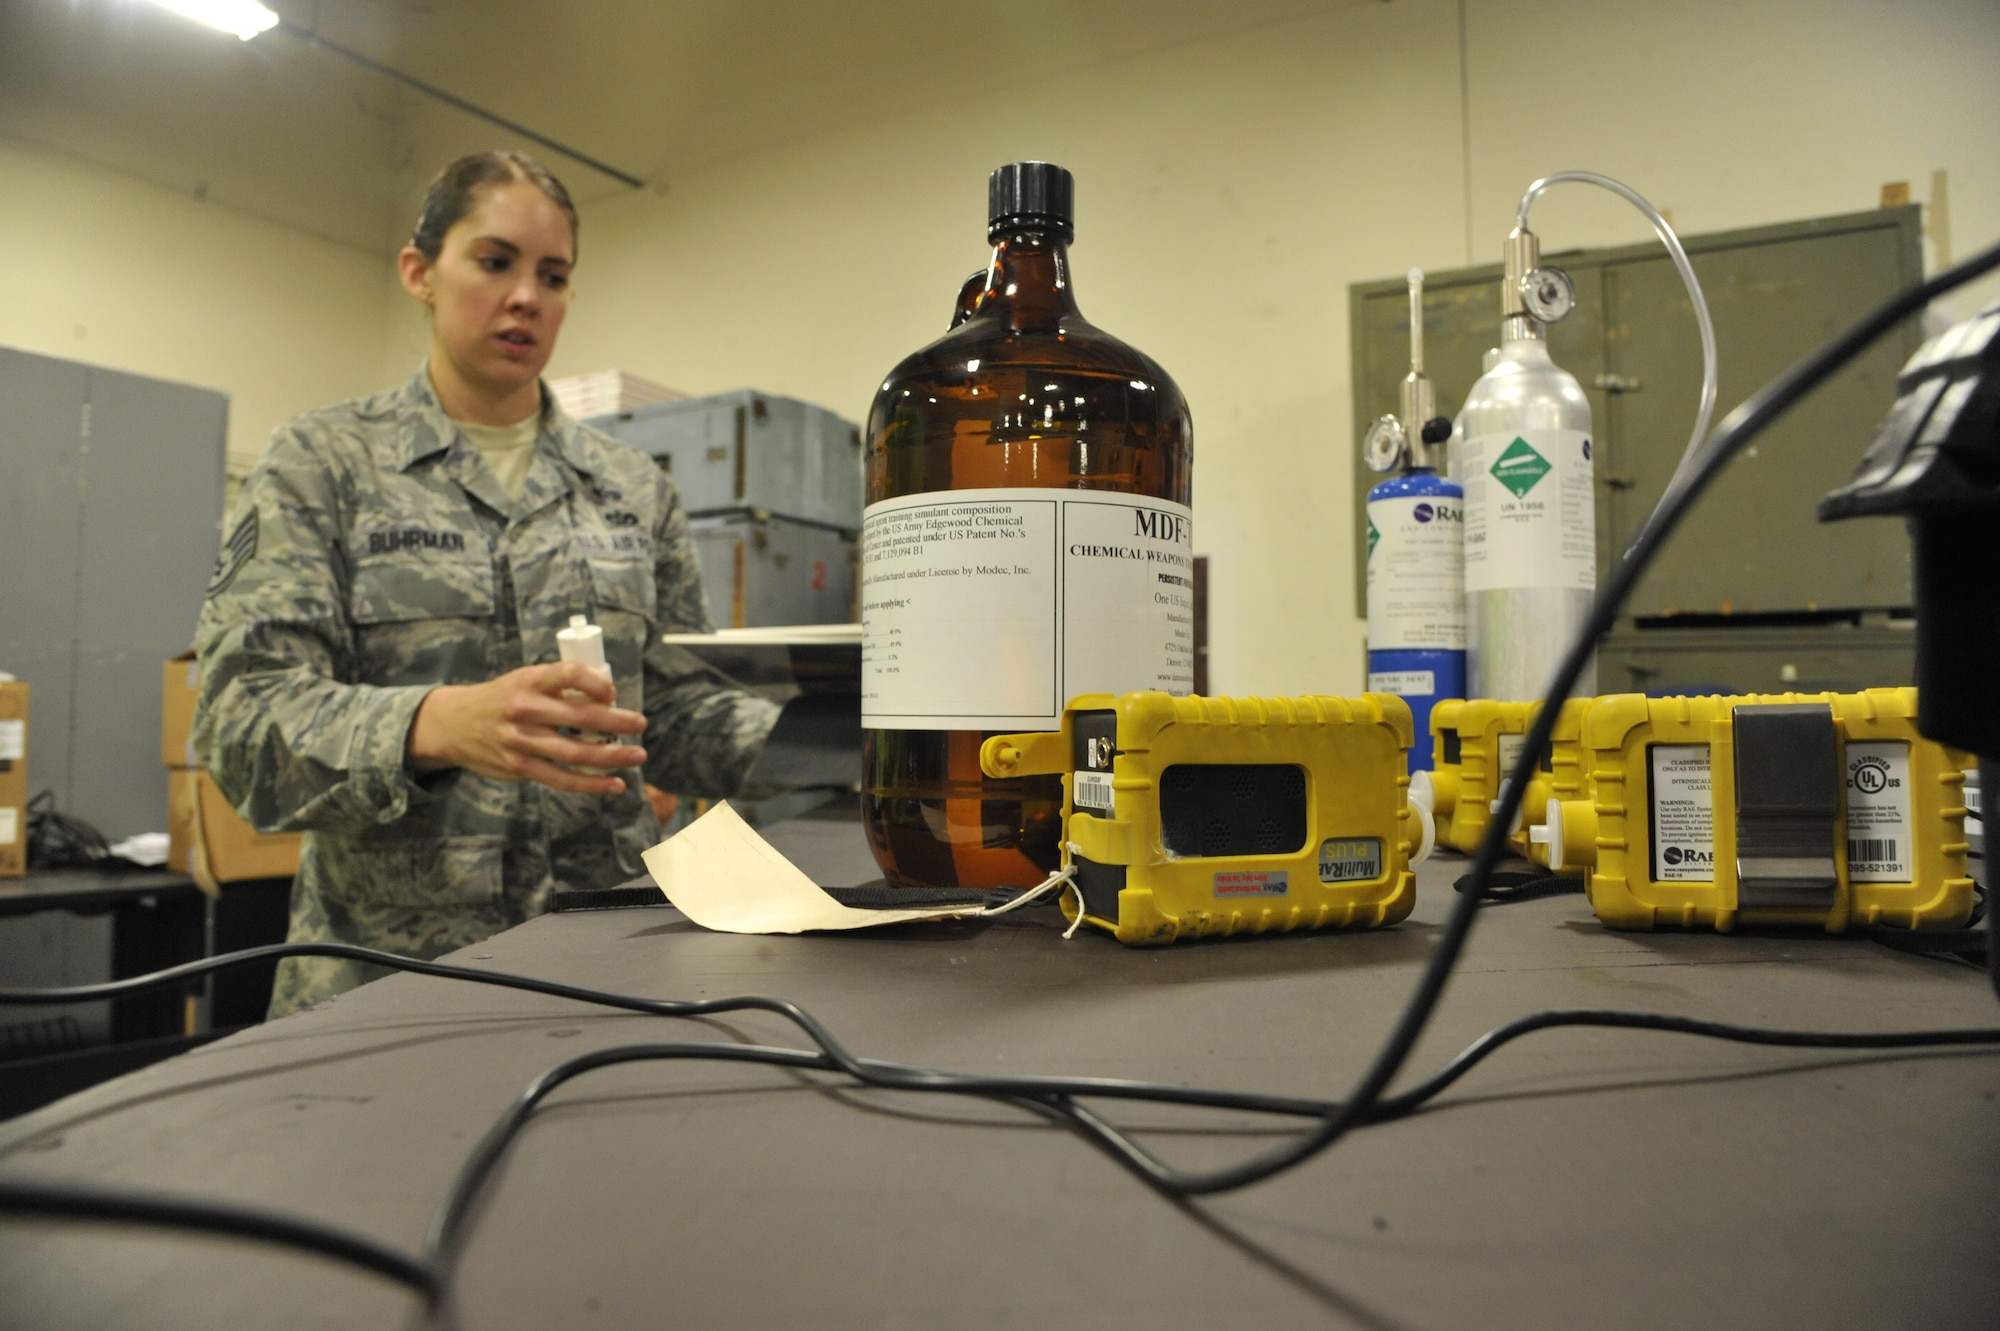 Staff Sgt. Rebecca Buhrman, 509th Civil Engineer Squadron NCO in charge of emergency management logistics, gathers powders and liquids at Whiteman Air Force Base, Mo., May 22, 2013. These liquids and powders are used for training purposes to ensure emergency management team readiness. (U.S. Air Force photo by Airman 1st Class Keenan Berry/Released)